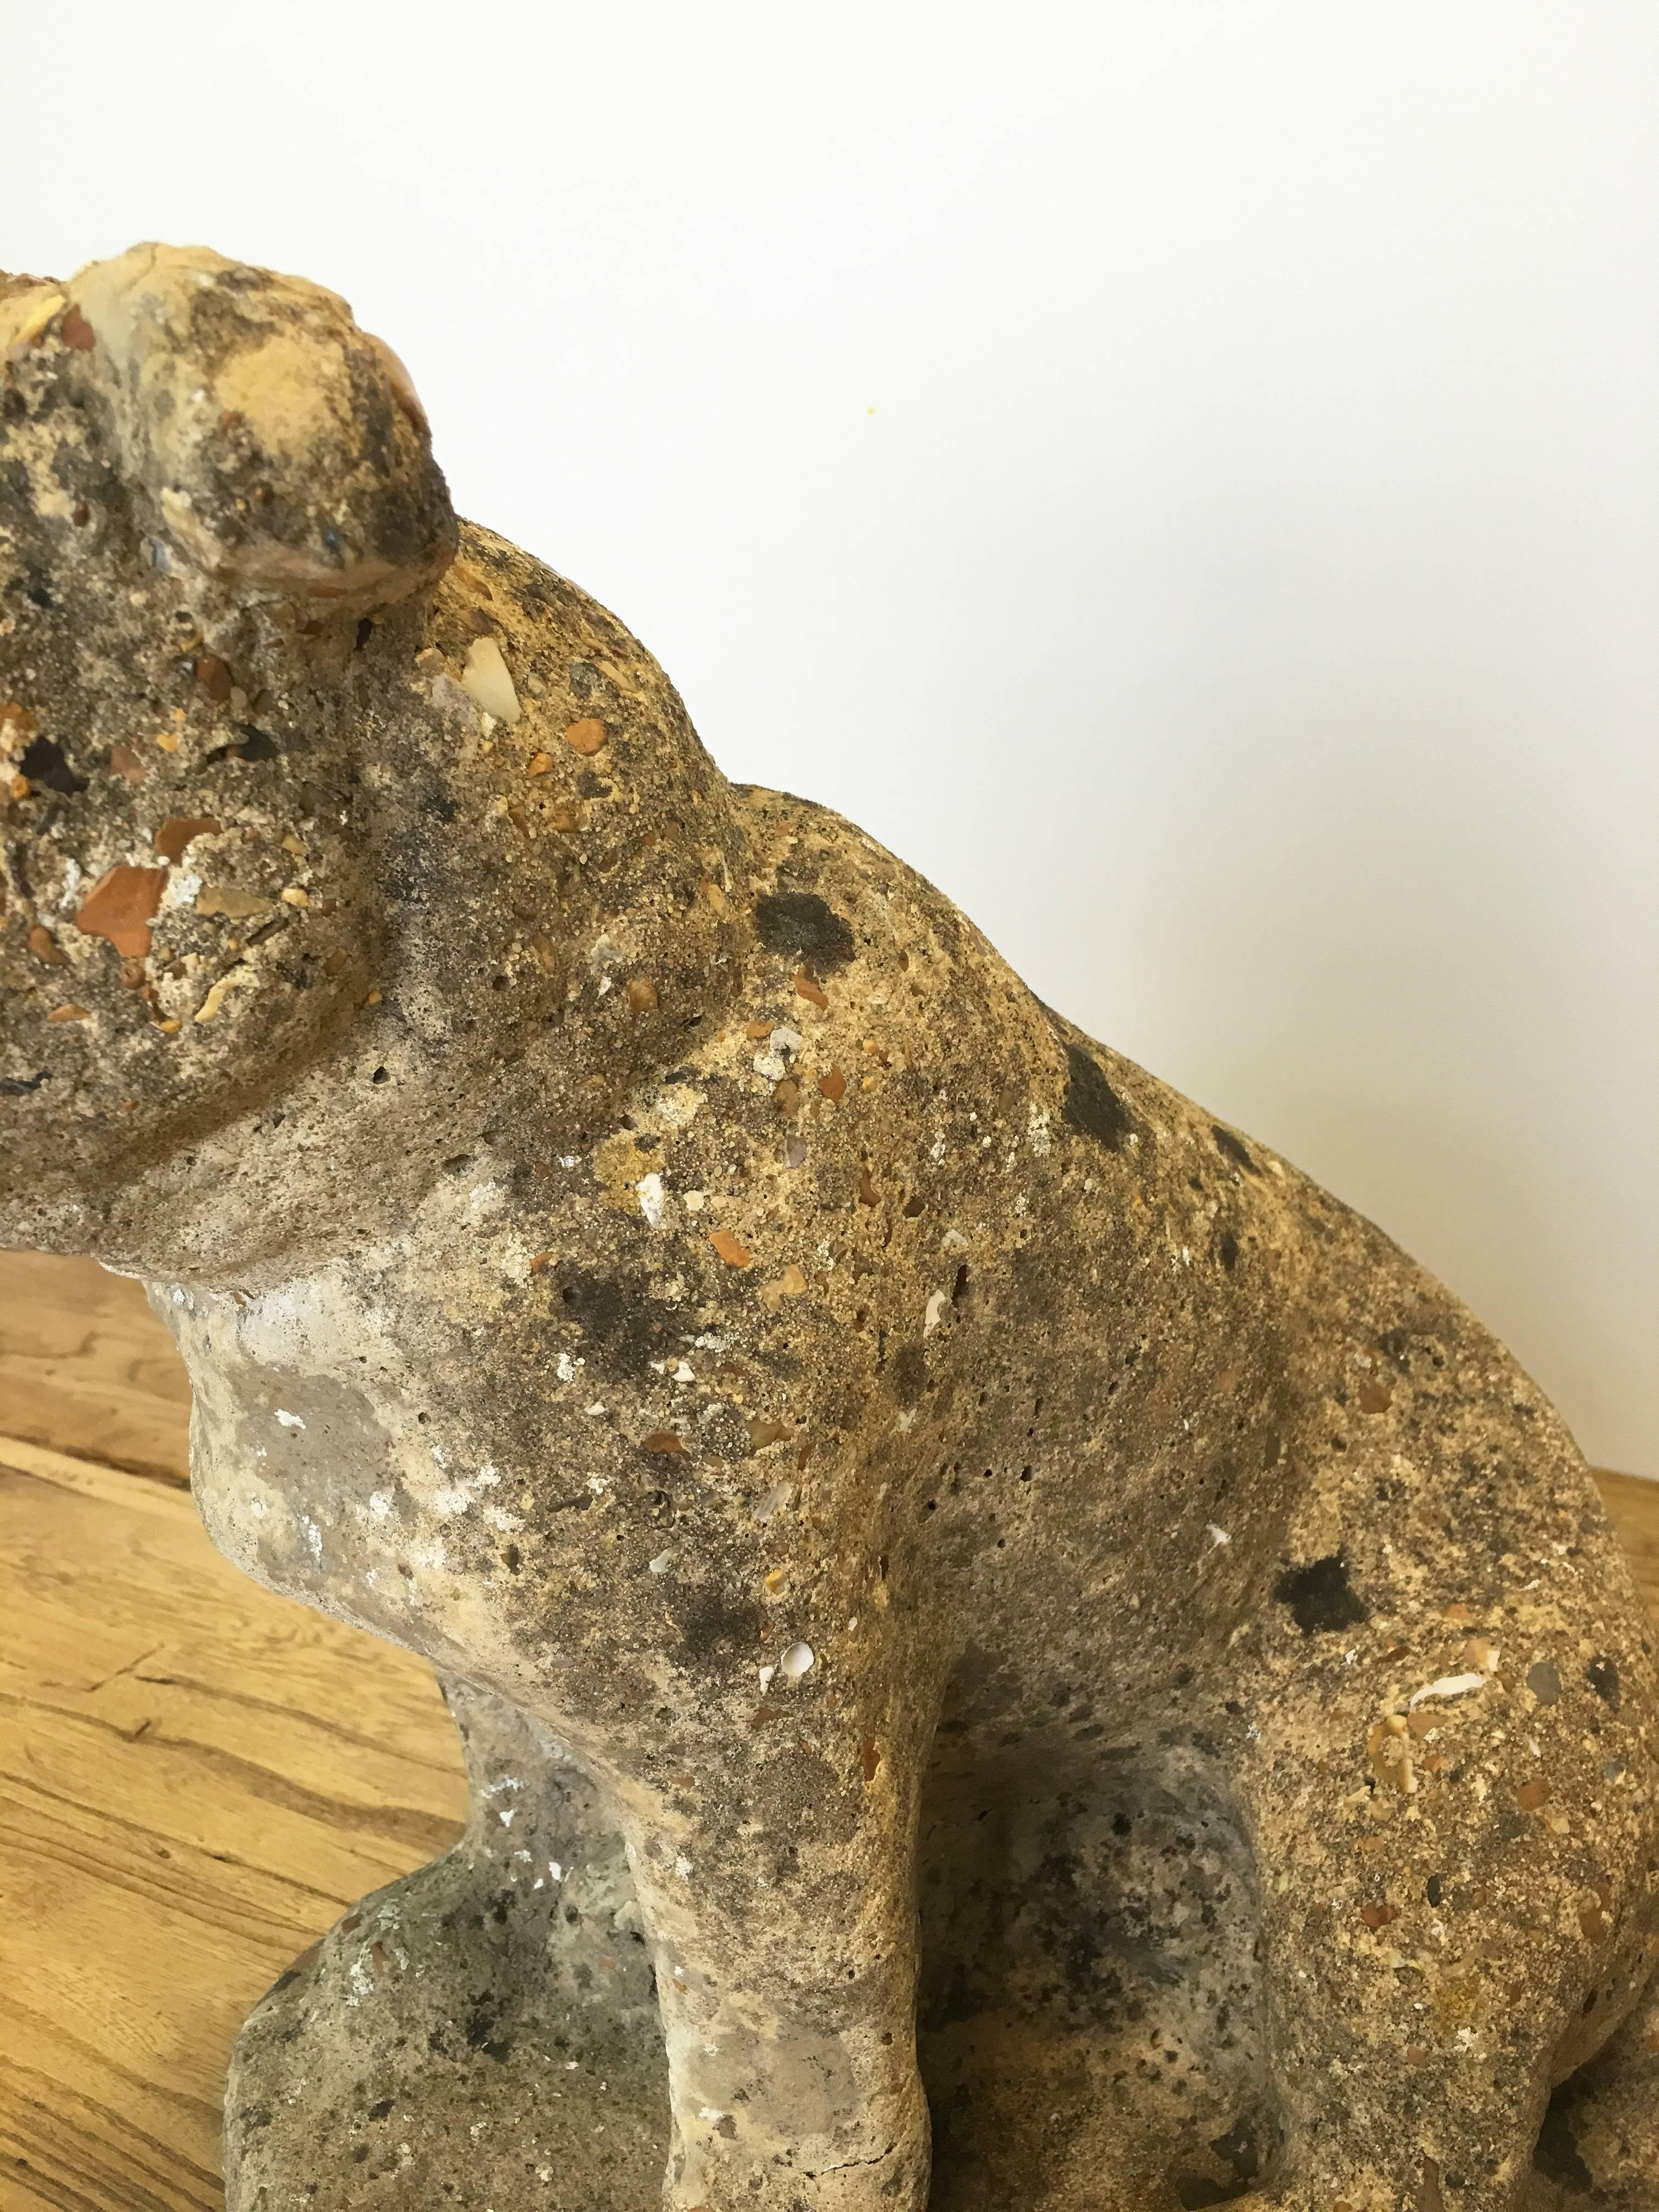 Vintage cast stone pug with one eye. Previously placed in a garden, with organic patina and spots of lichen. Minor wear consistent with age and use.